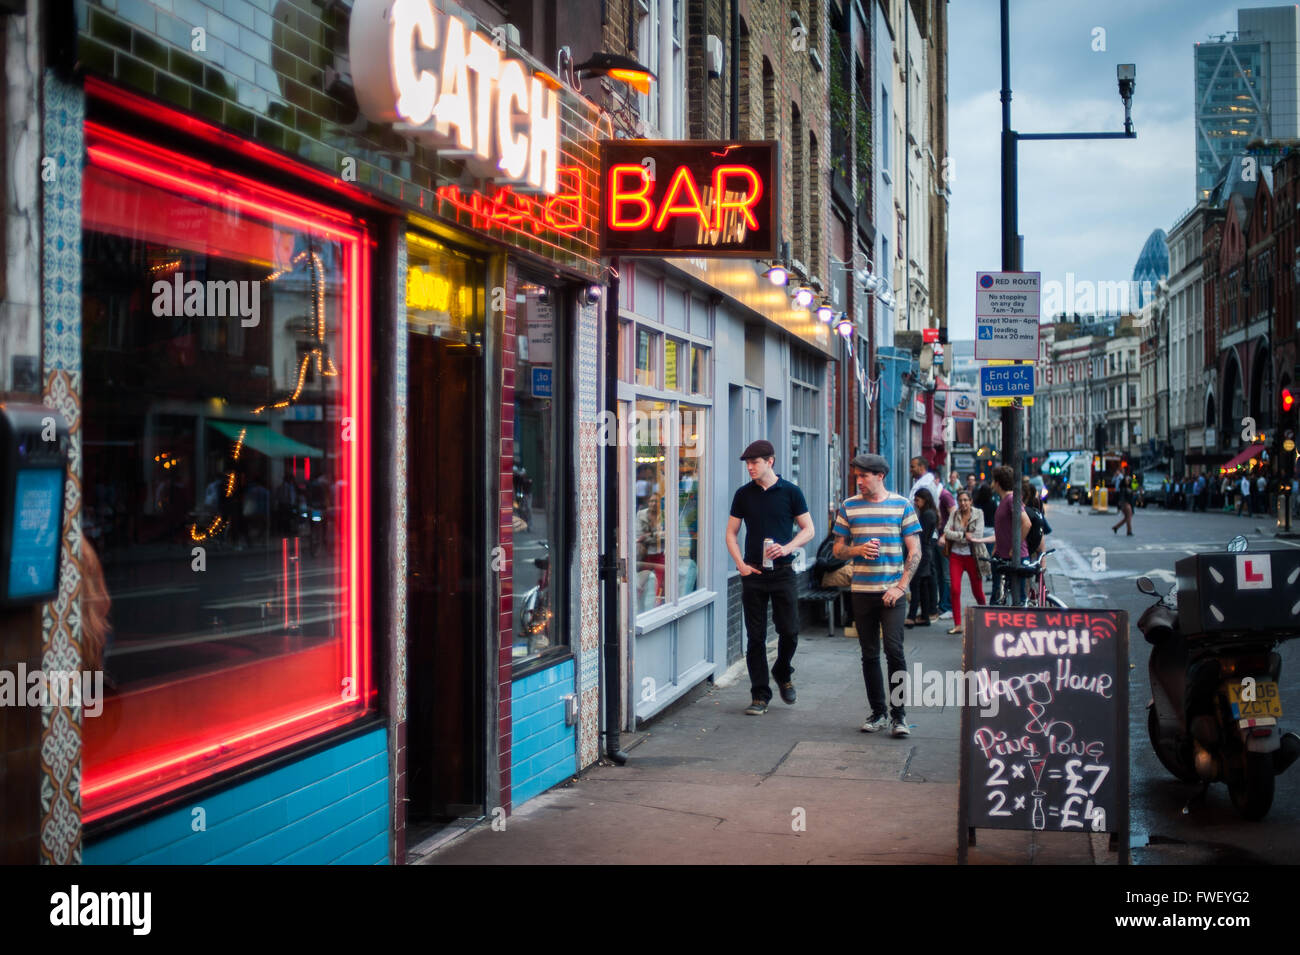 Hipster bar and street scene, Shoreditch, East London Stock Photo